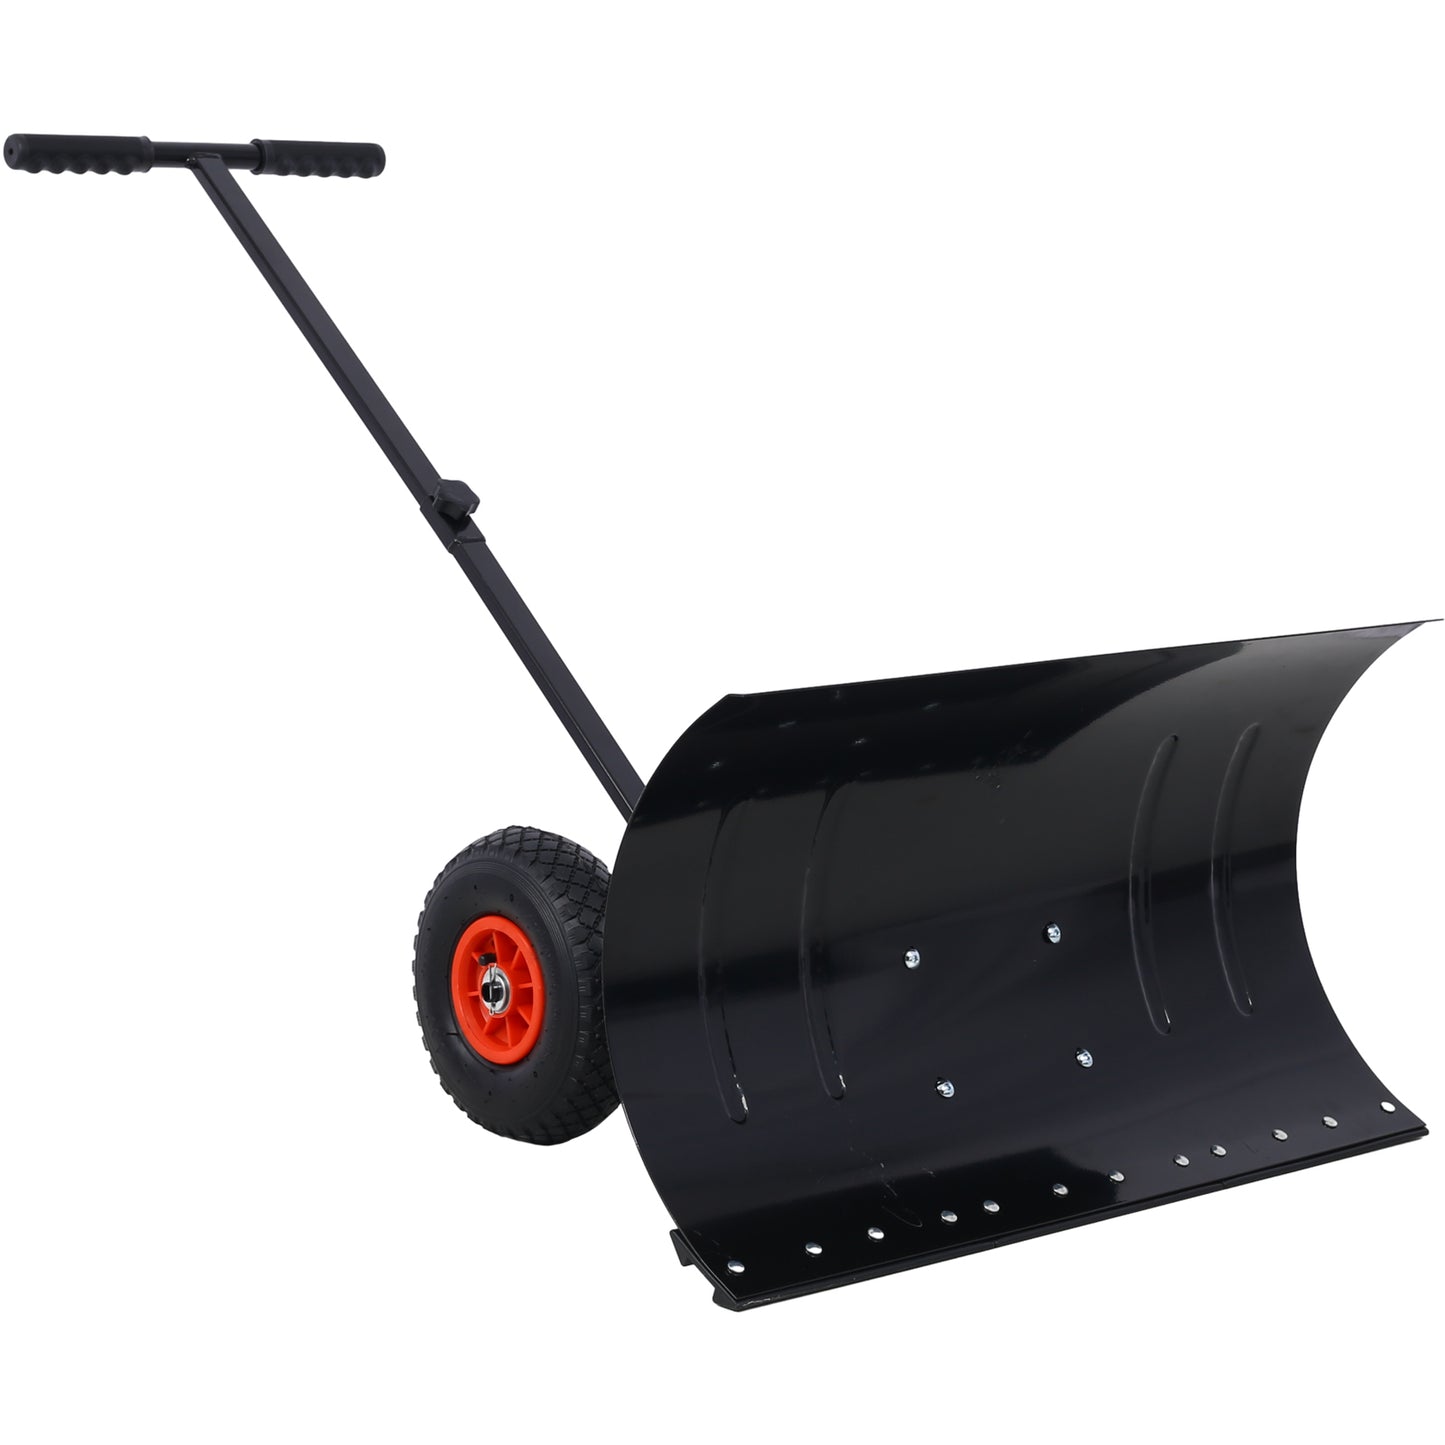 Snow Shovel with Wheels, Snow Pusher, Cushioned Adjustable Angle Handle Snow Removal Tool, 29" Blade, 10" Wheels,black color